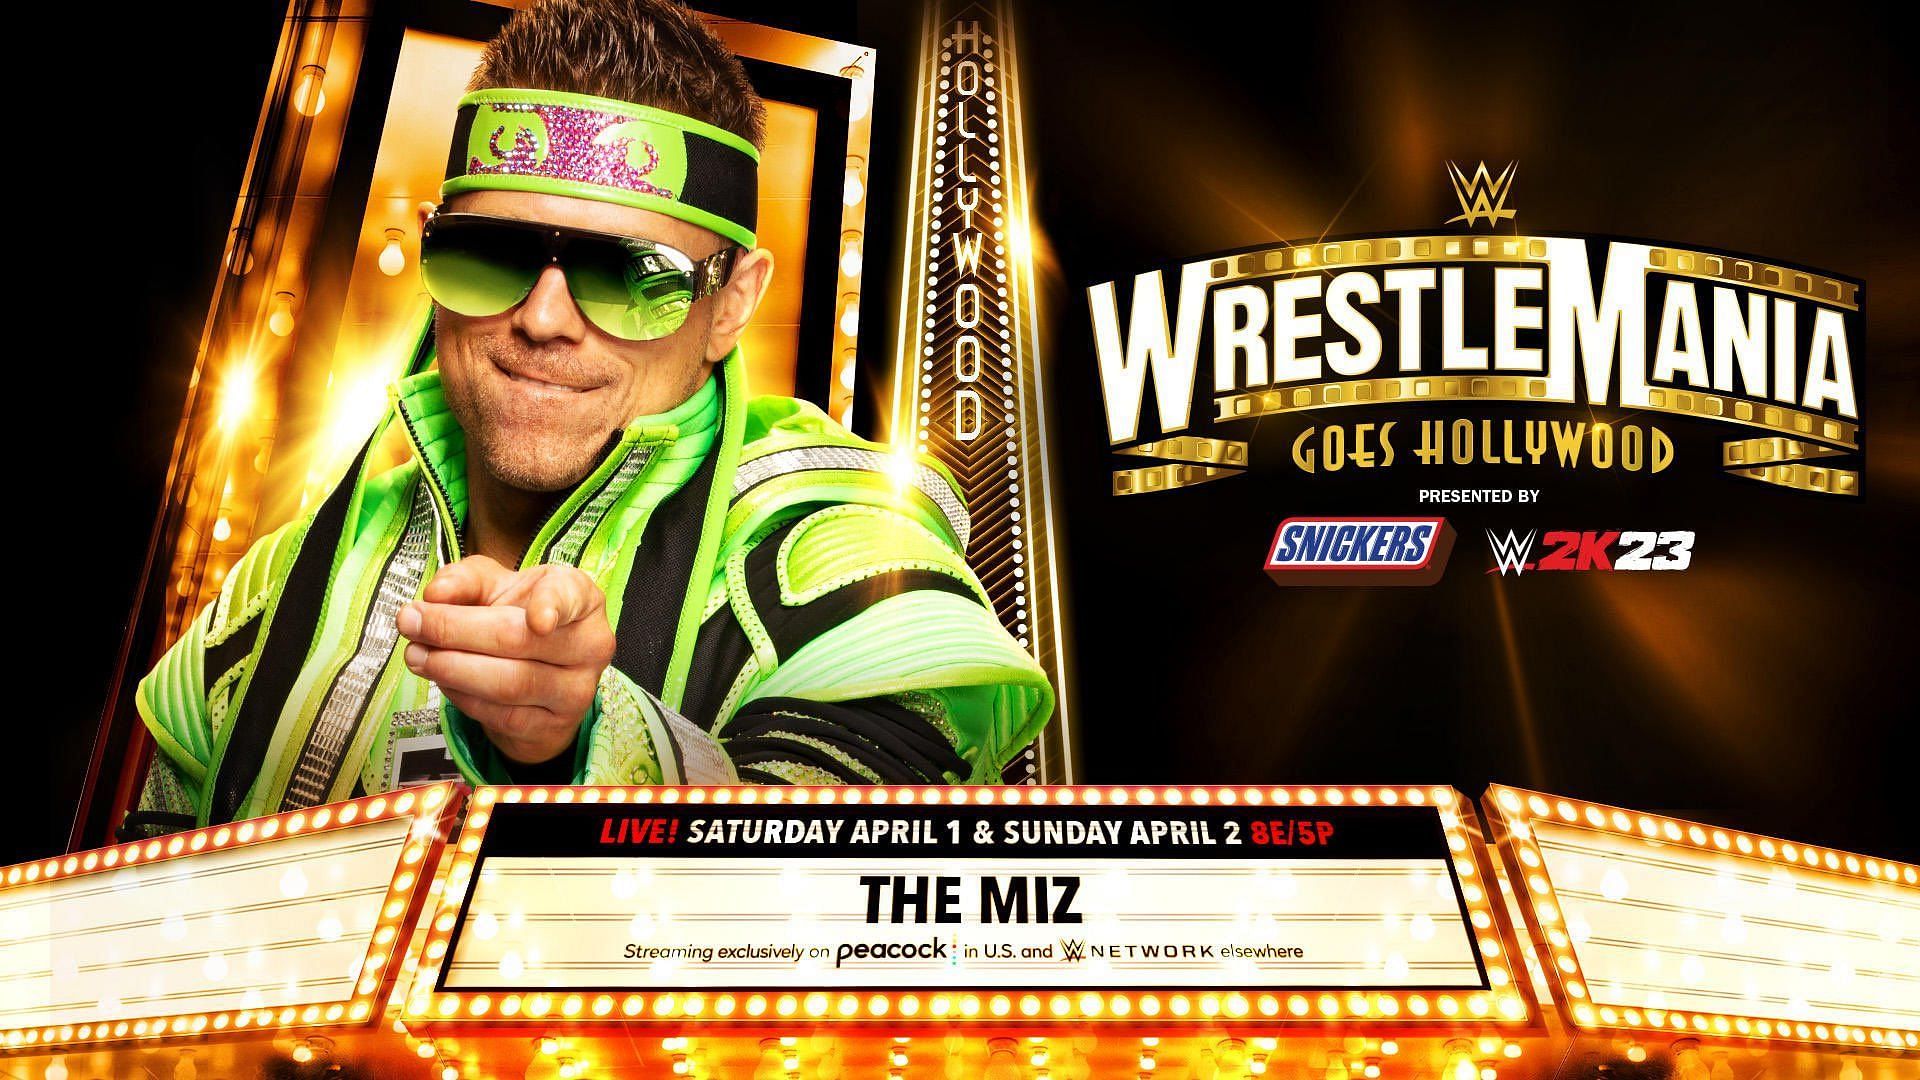 Multiple celebrities are speculated to co-host WWE WrestleMania 39 